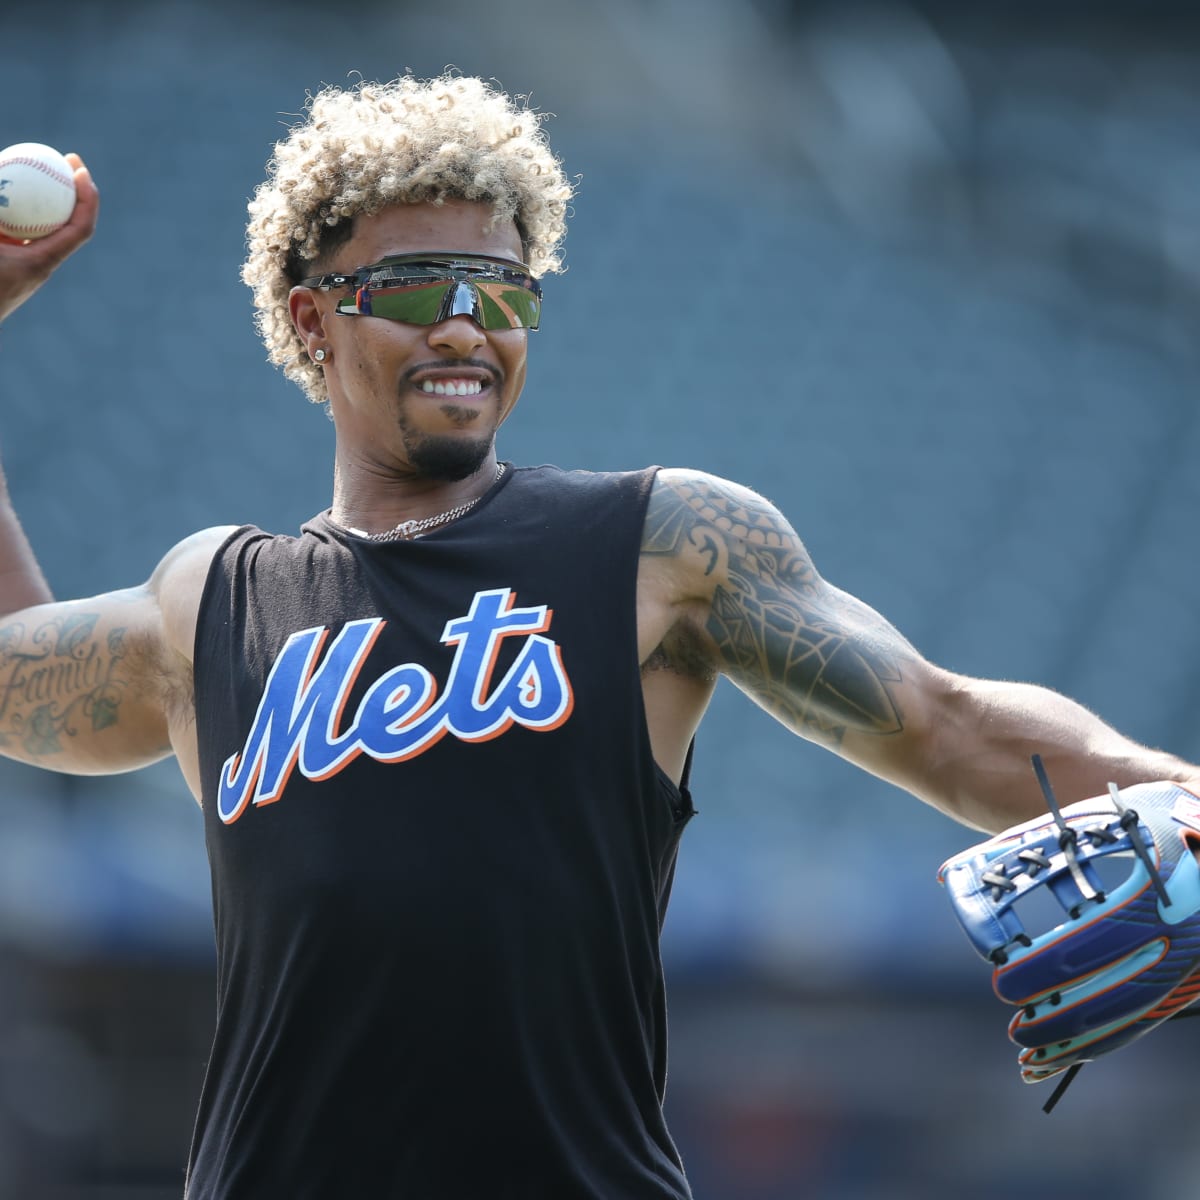 How Mets' Francisco Lindor used key tenets to get back into swing